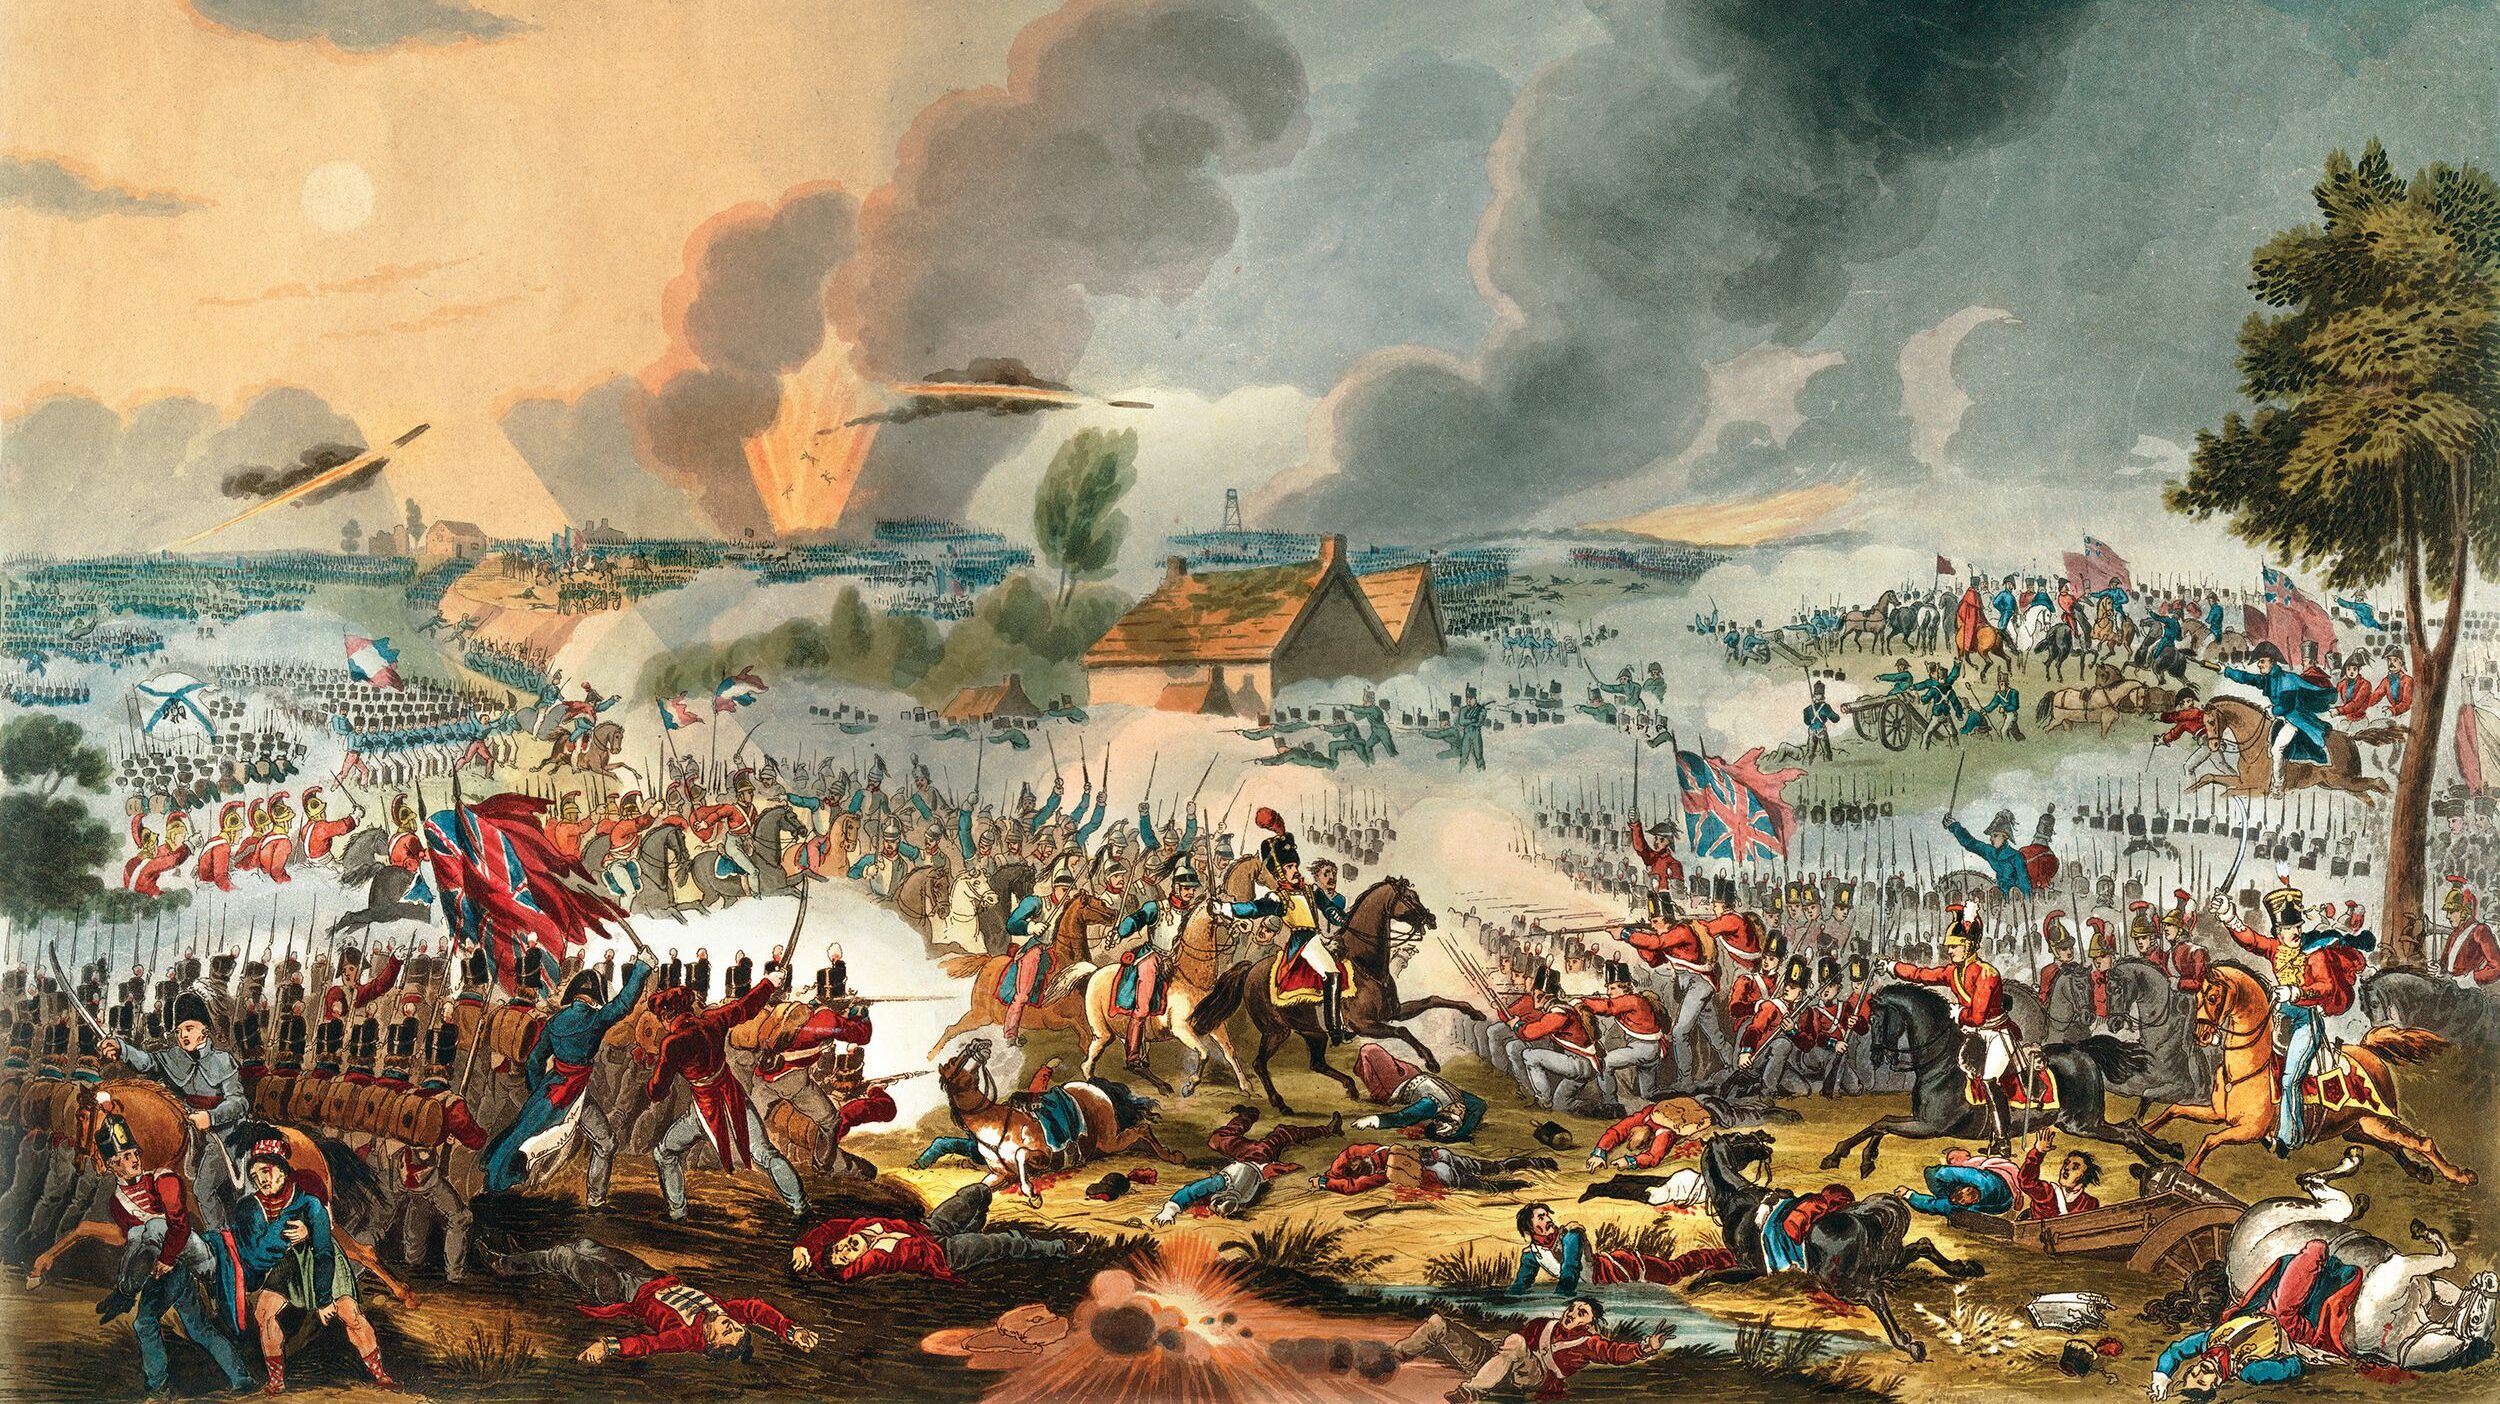 Wellington’s artillery commander at Waterloo said that without Henry Shrapnel’s devastating new shell, Allied forces could not have taken a key position on the battlefield.